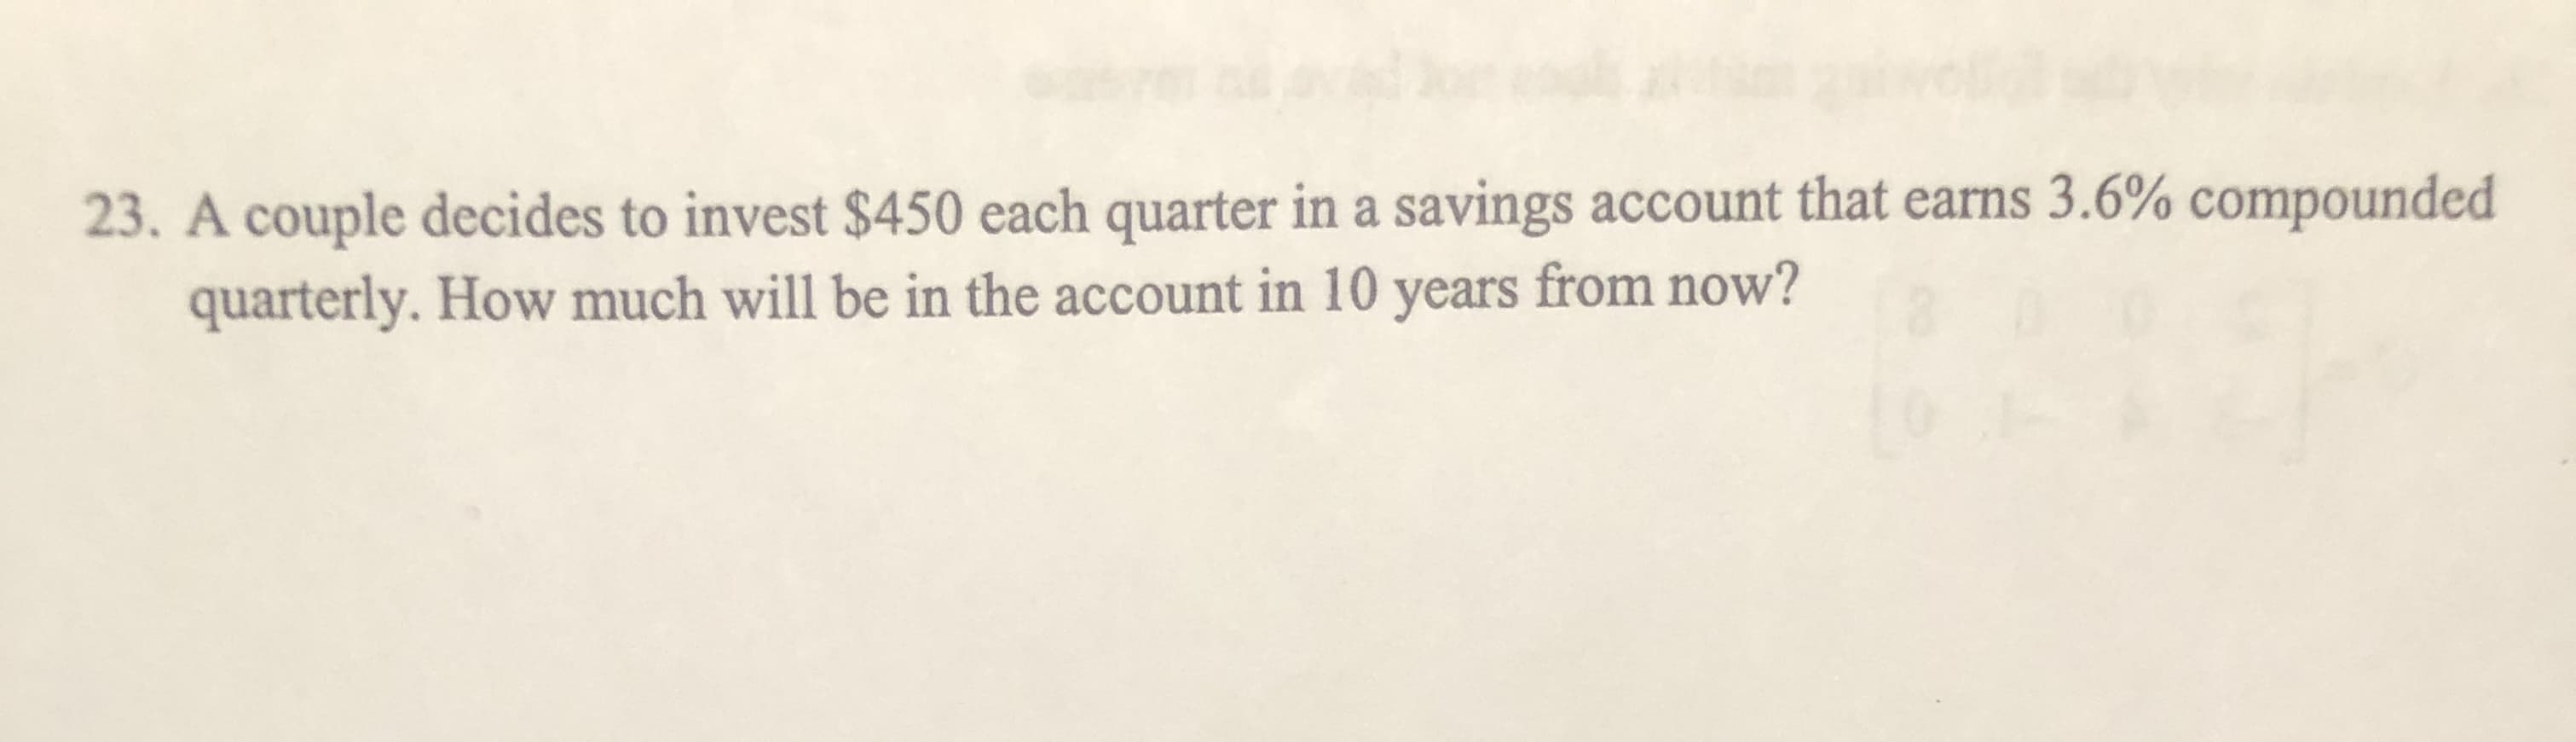 23. A couple decides to invest $450 each quarter in a savings account that earns 3.6% compounded
quarterly. How much will be in the account in 10 years from now?
